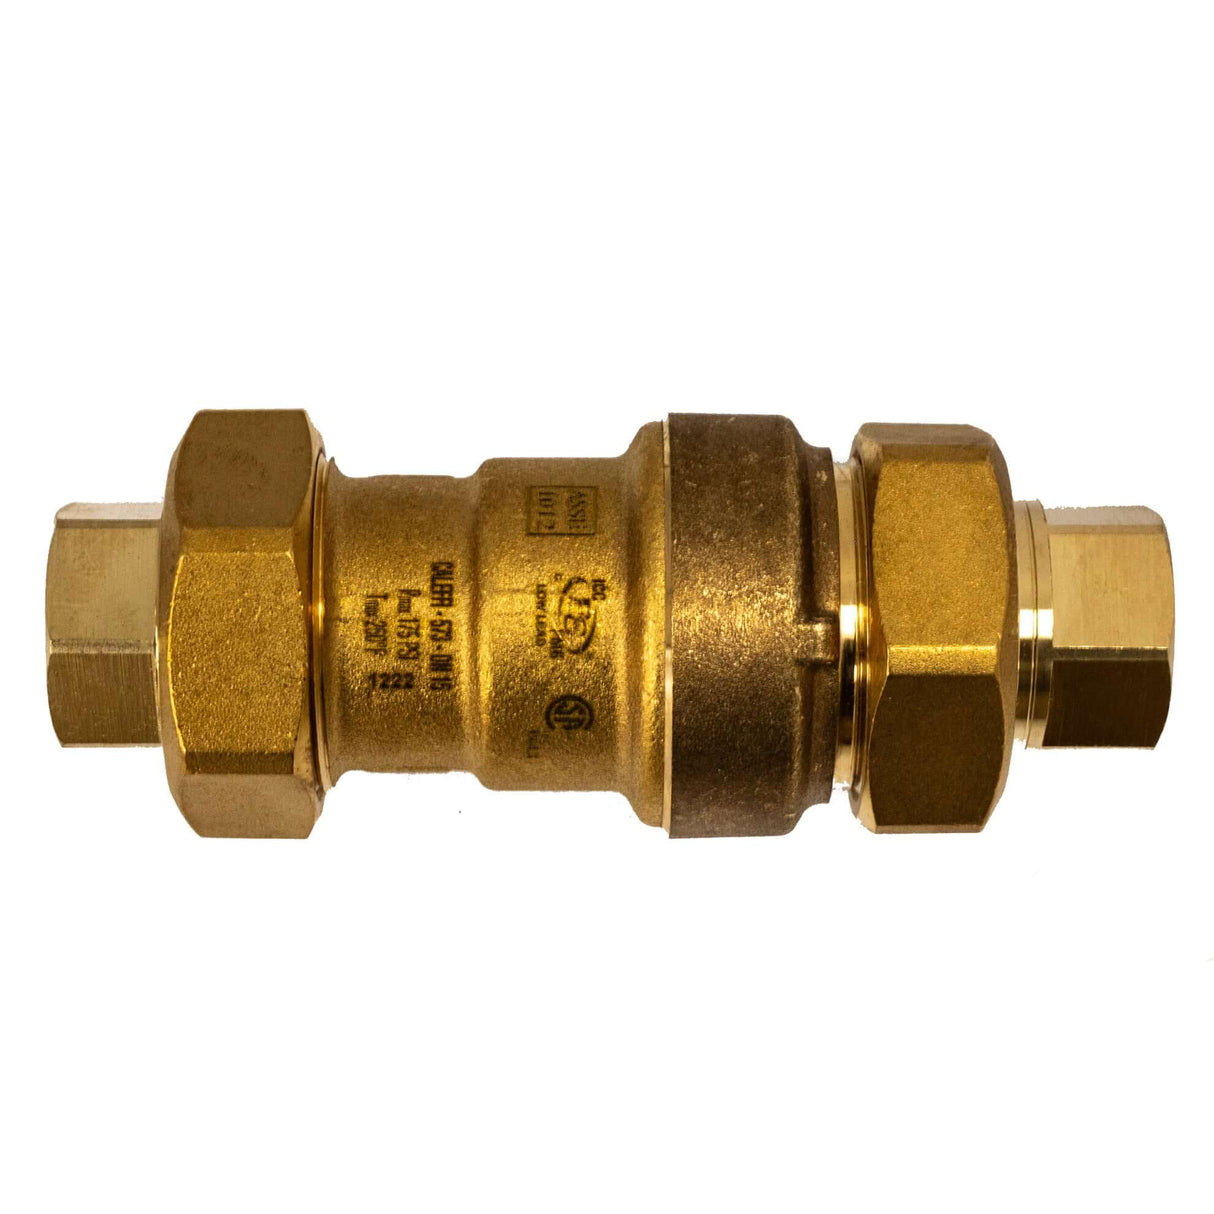 1/2" Union Dual check backflow preventer with atmospheric vent